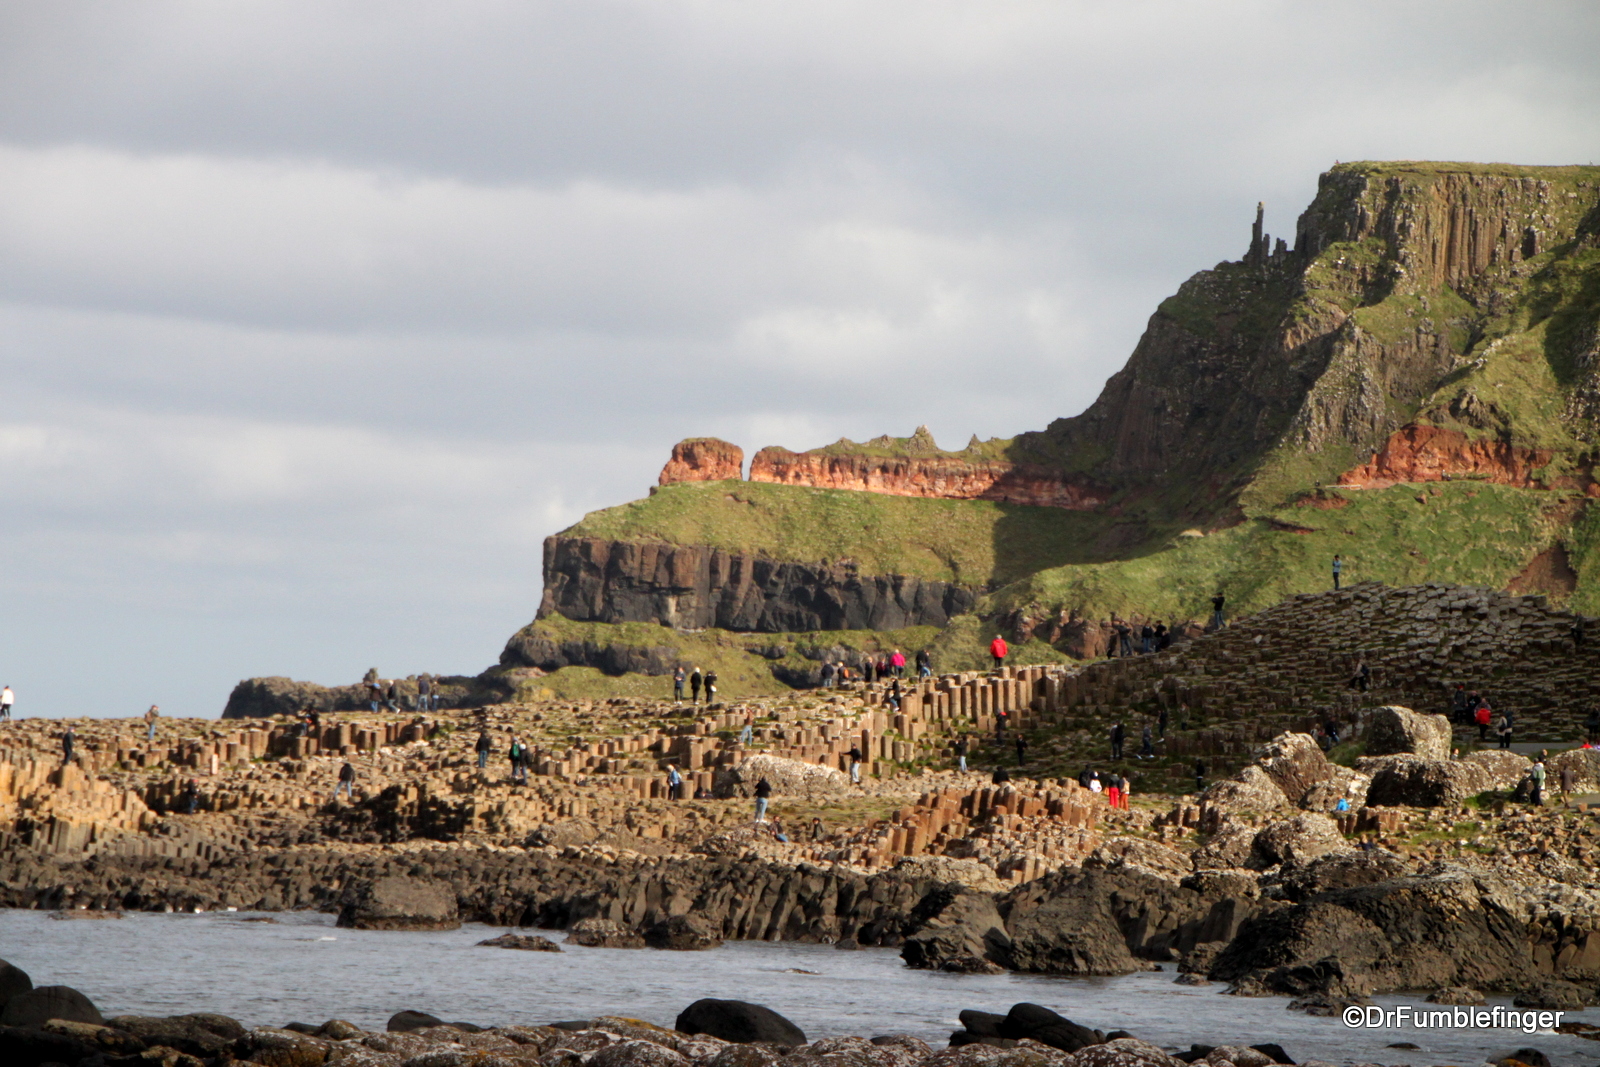 First view of Giant's Causeway